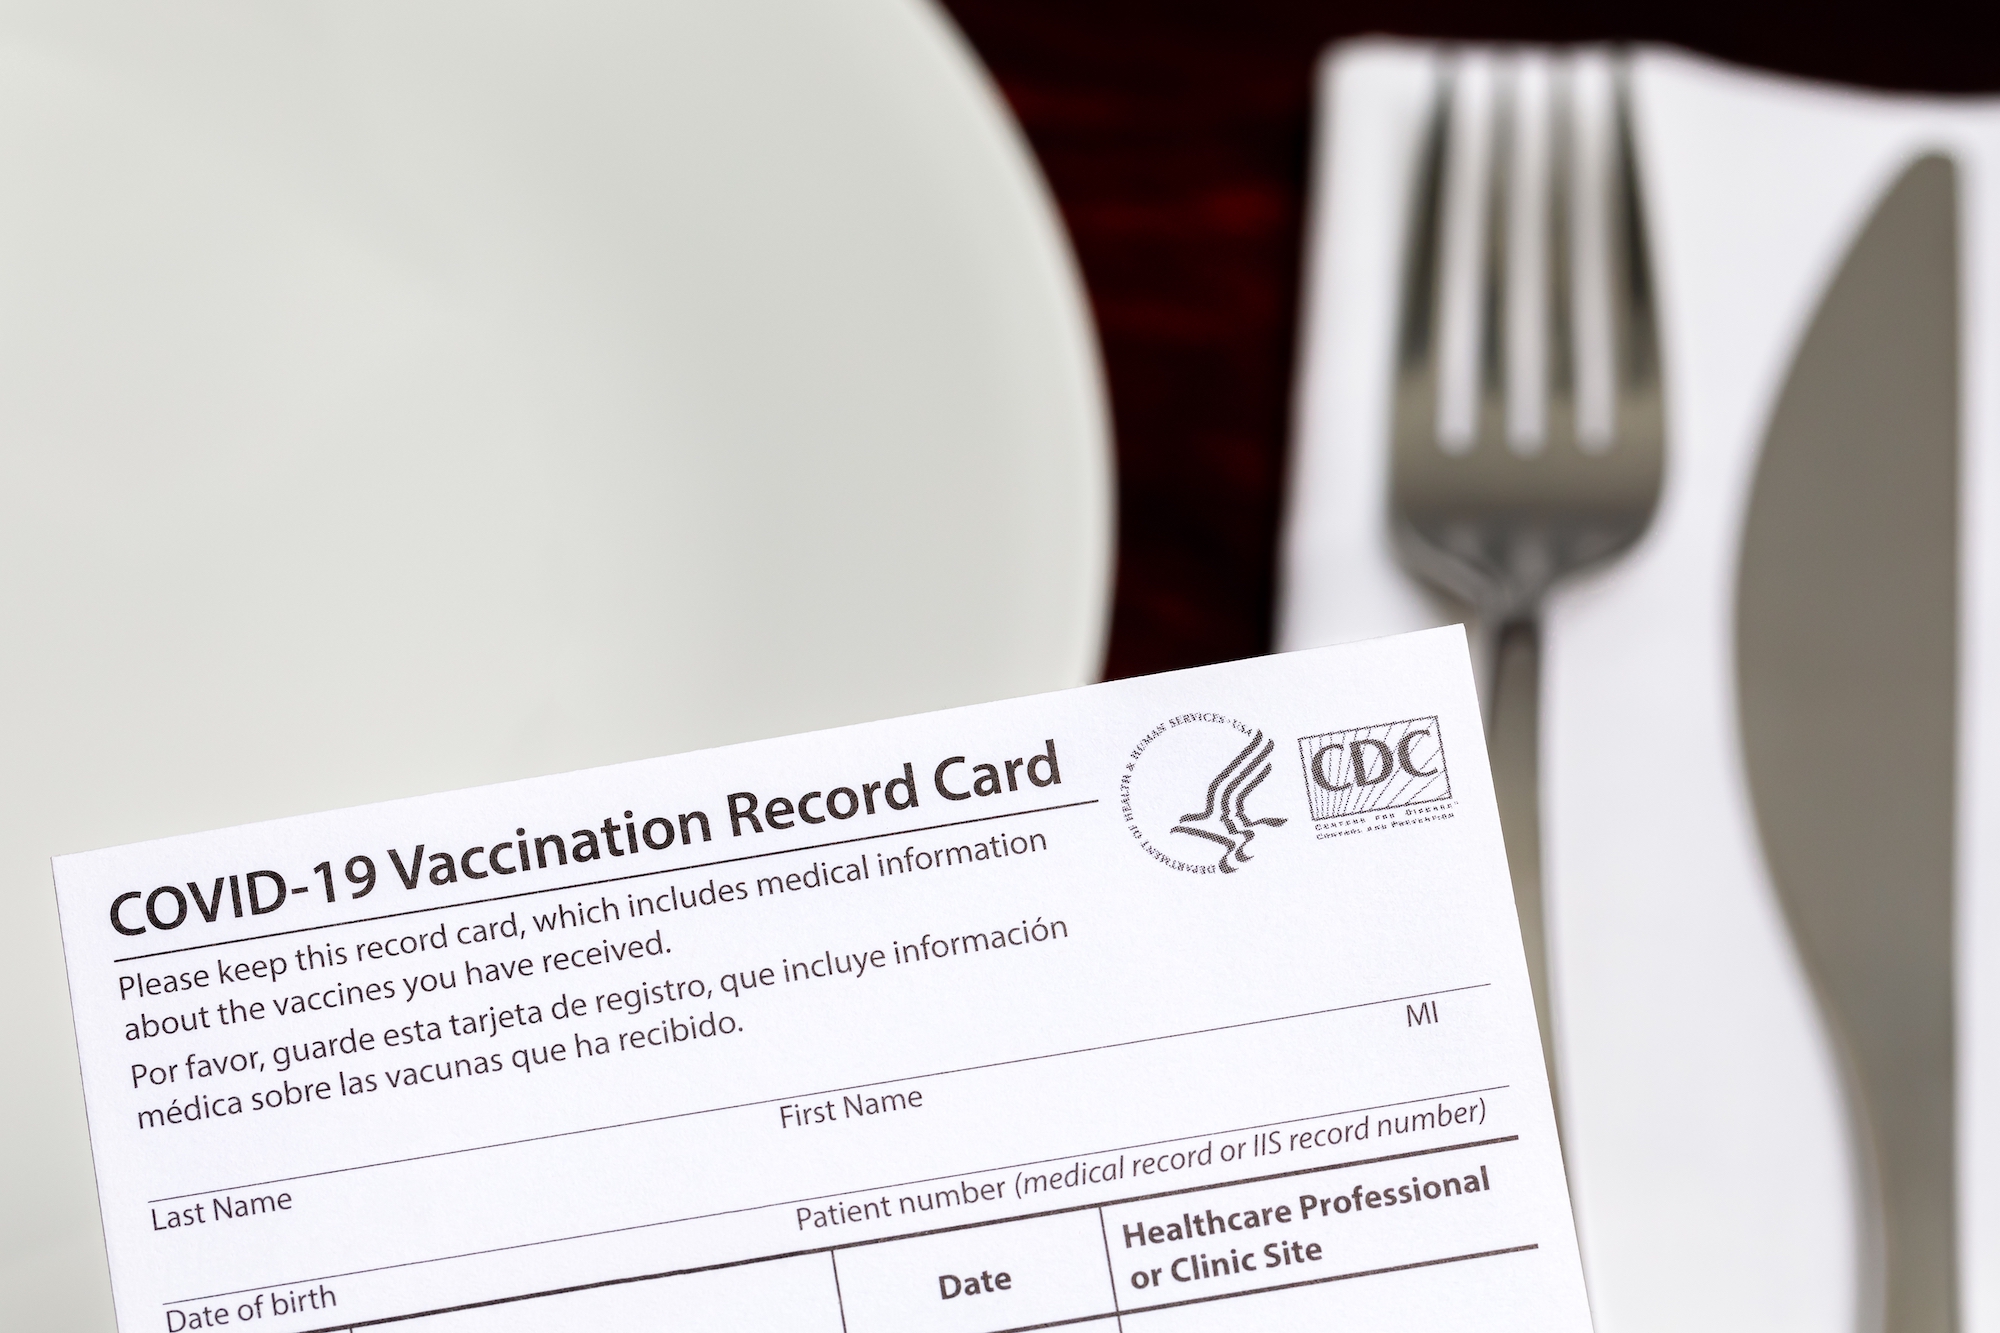 a vaccination card lies on top of a place setting of a plate, fork, knife, and napkin